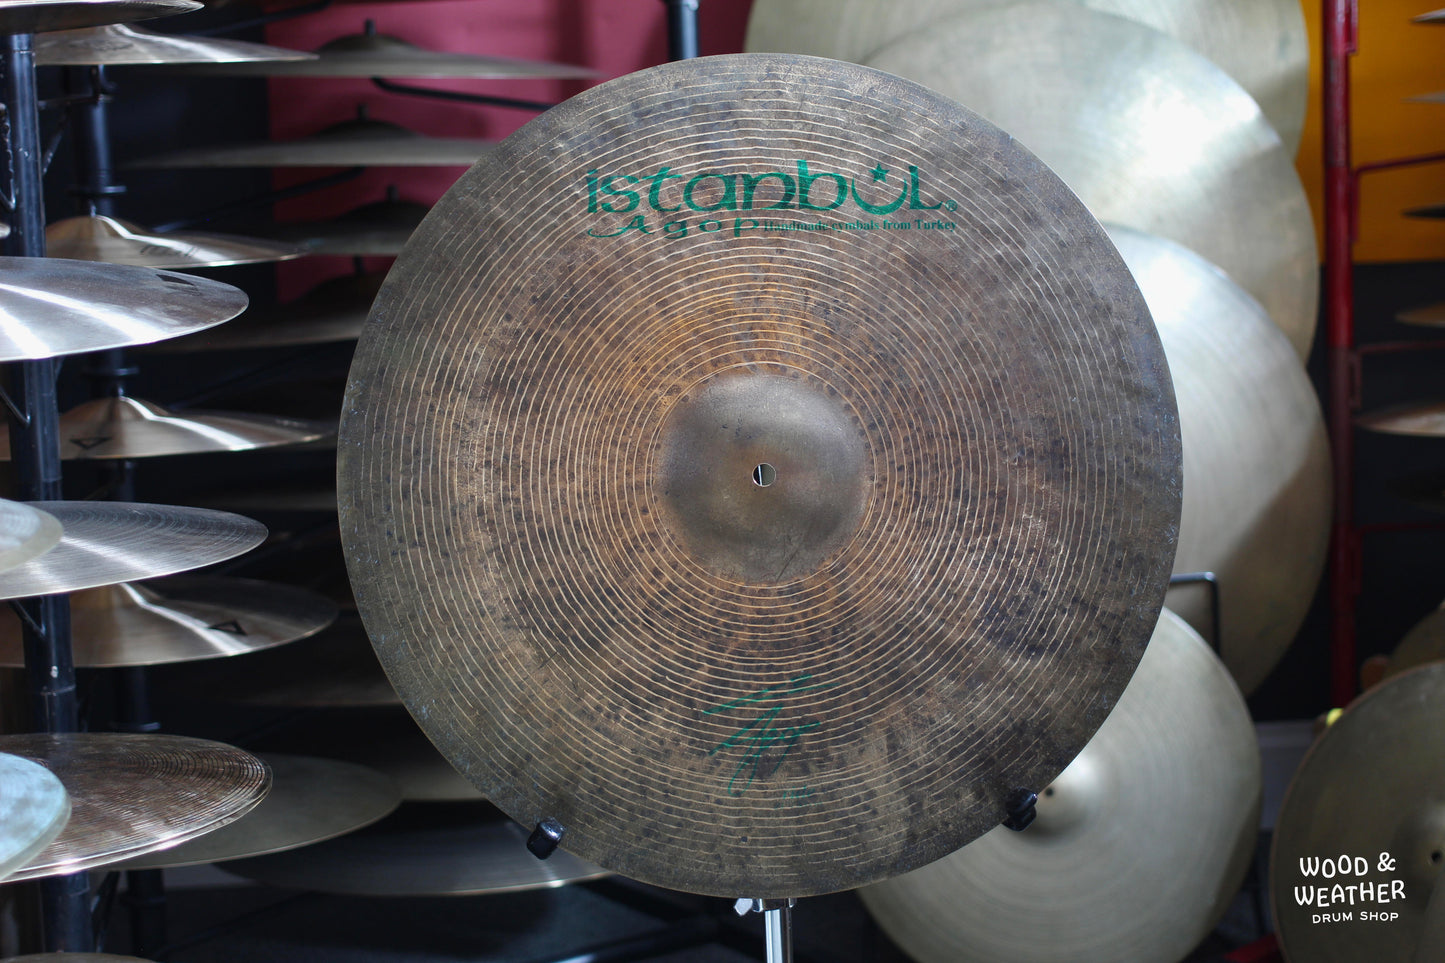 Used Istanbul Agop 21" Signature Ride Cymbal 1742g